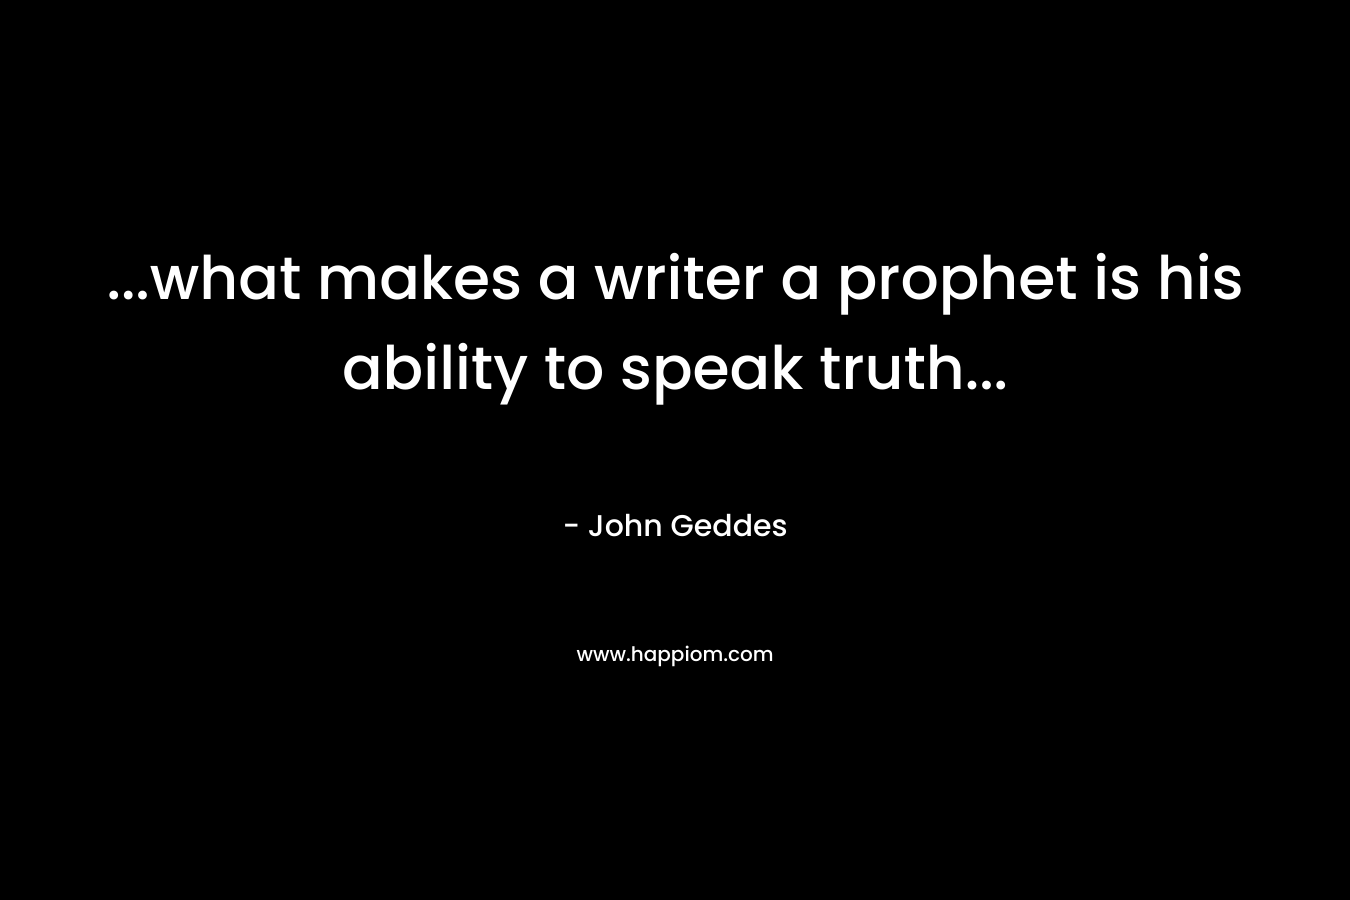 ...what makes a writer a prophet is his ability to speak truth...